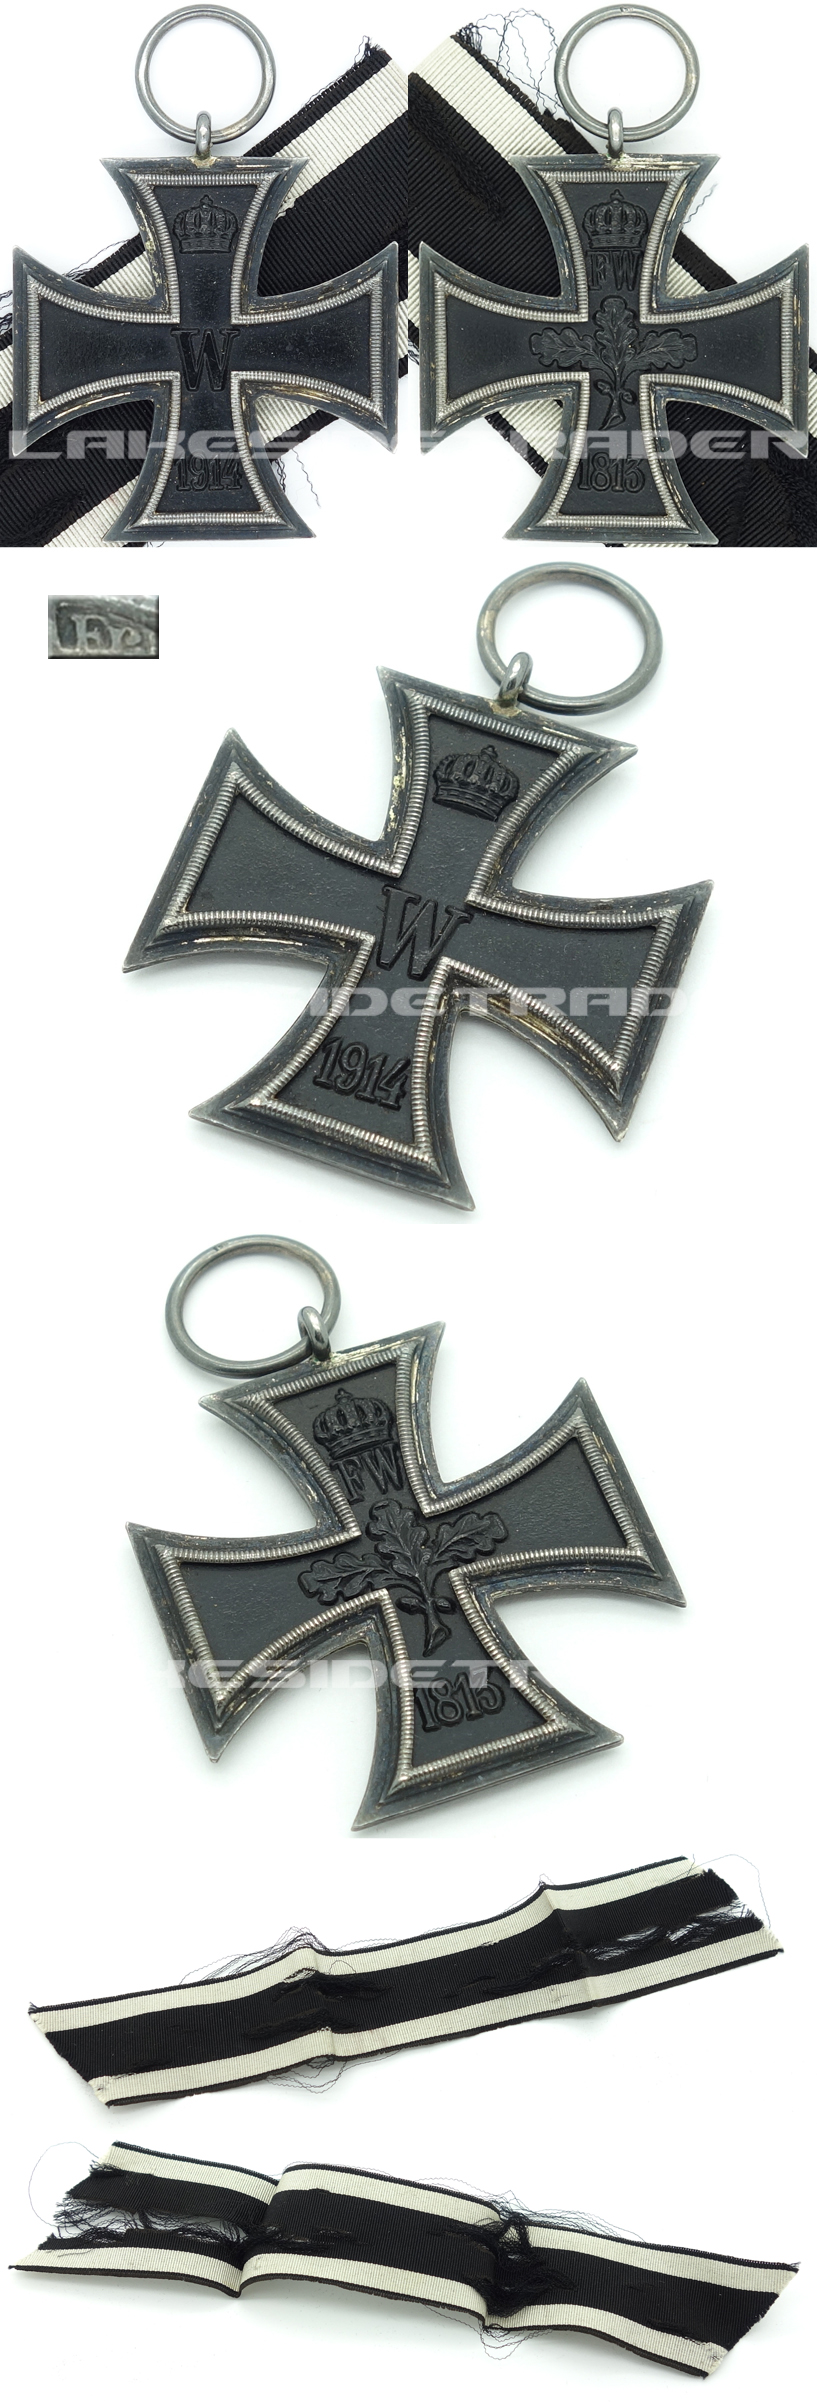 Imperial 2nd Class Iron Cross by Fr